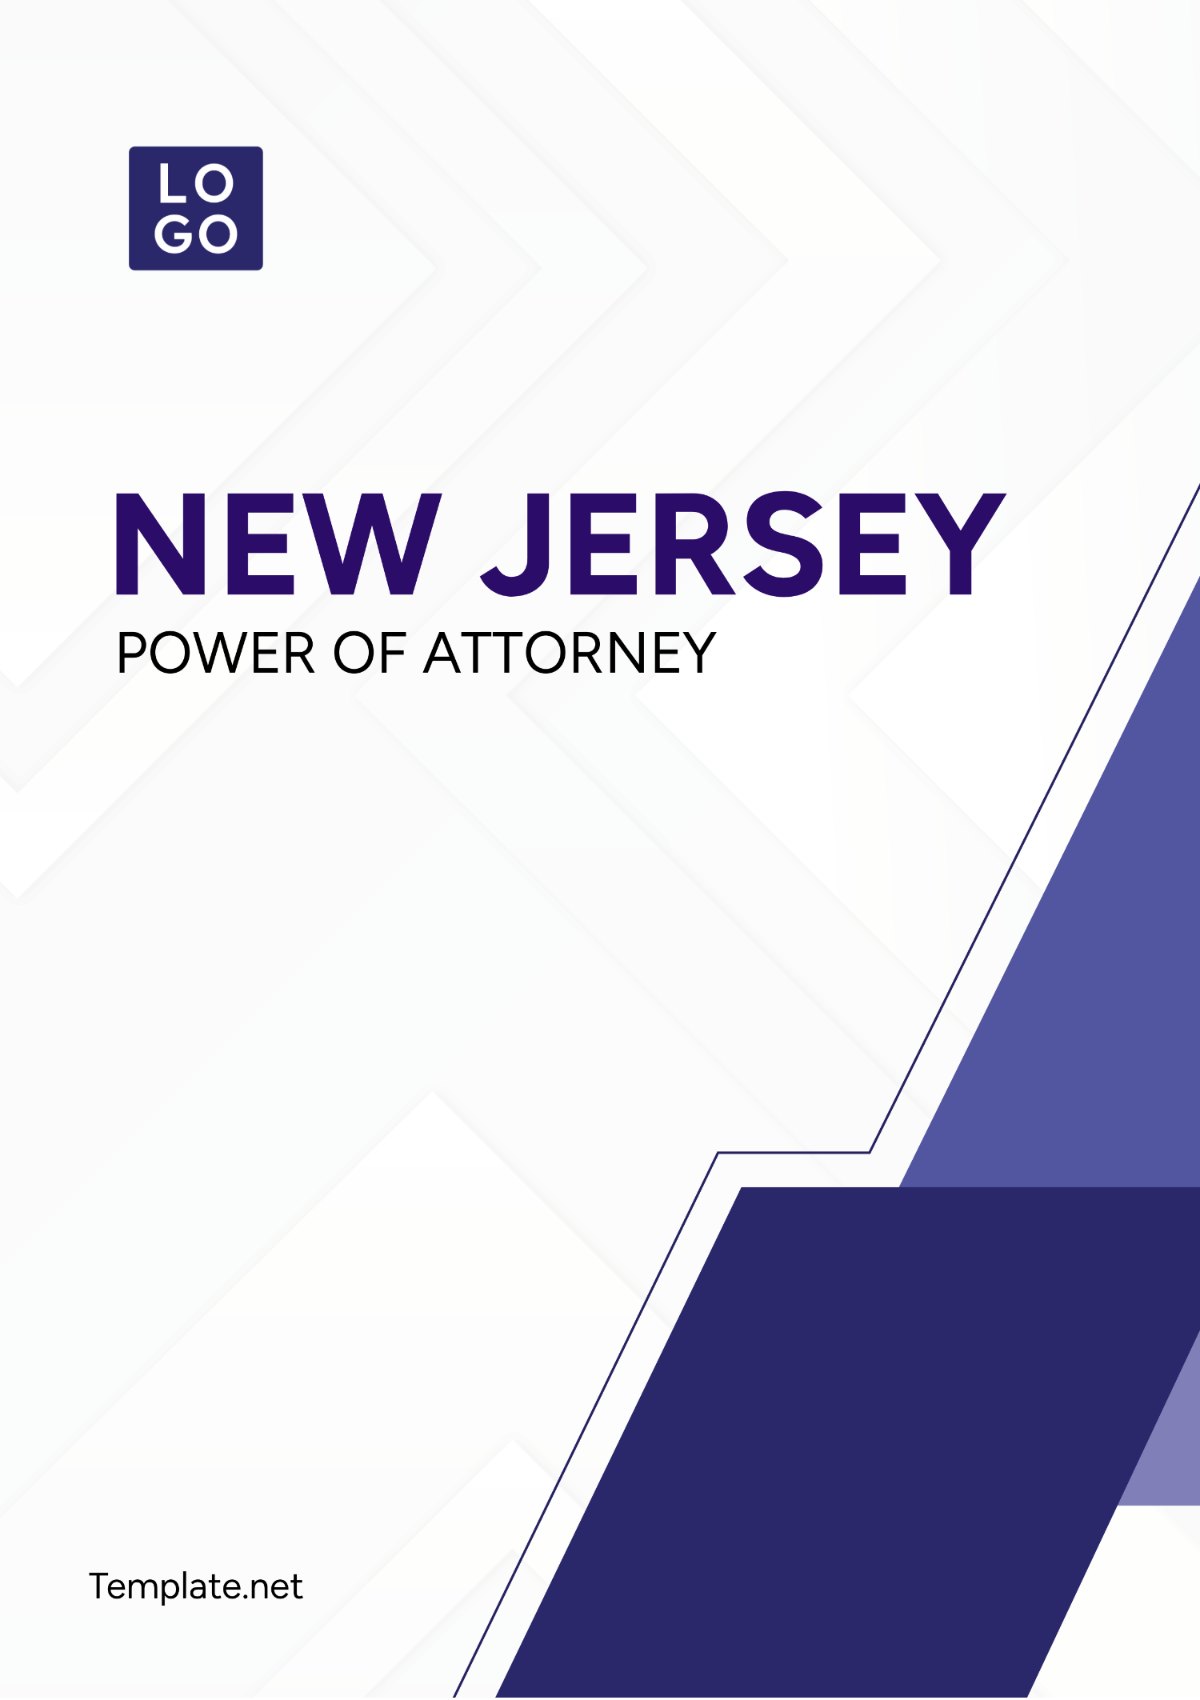 New Jersey Power of Attorney Template